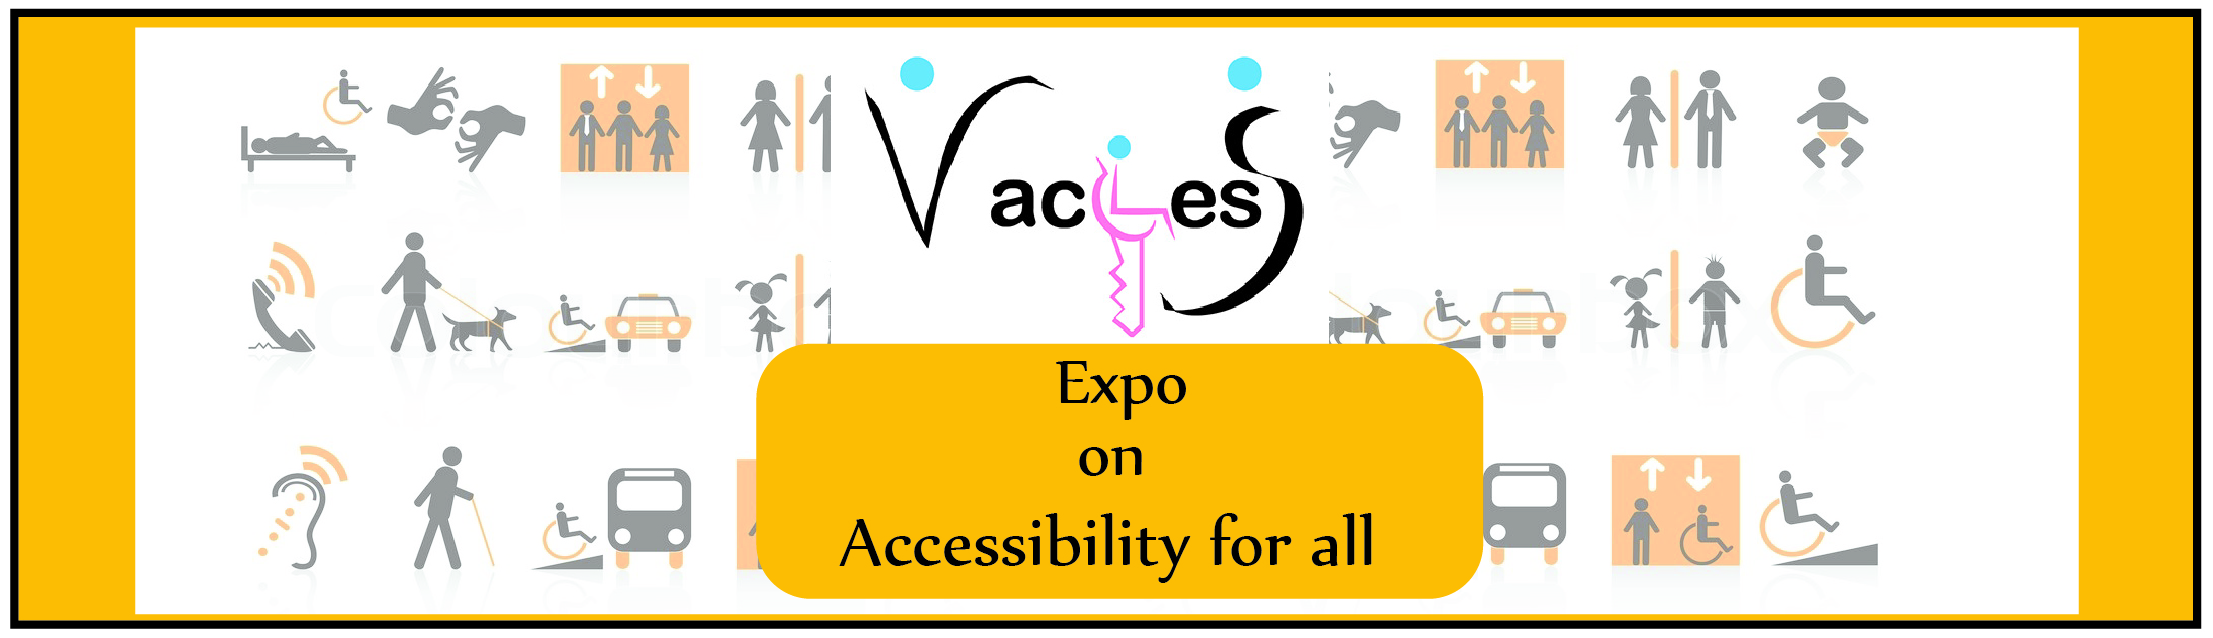 Vaccess Assistive Devices and Technologies expo in Chennai banner